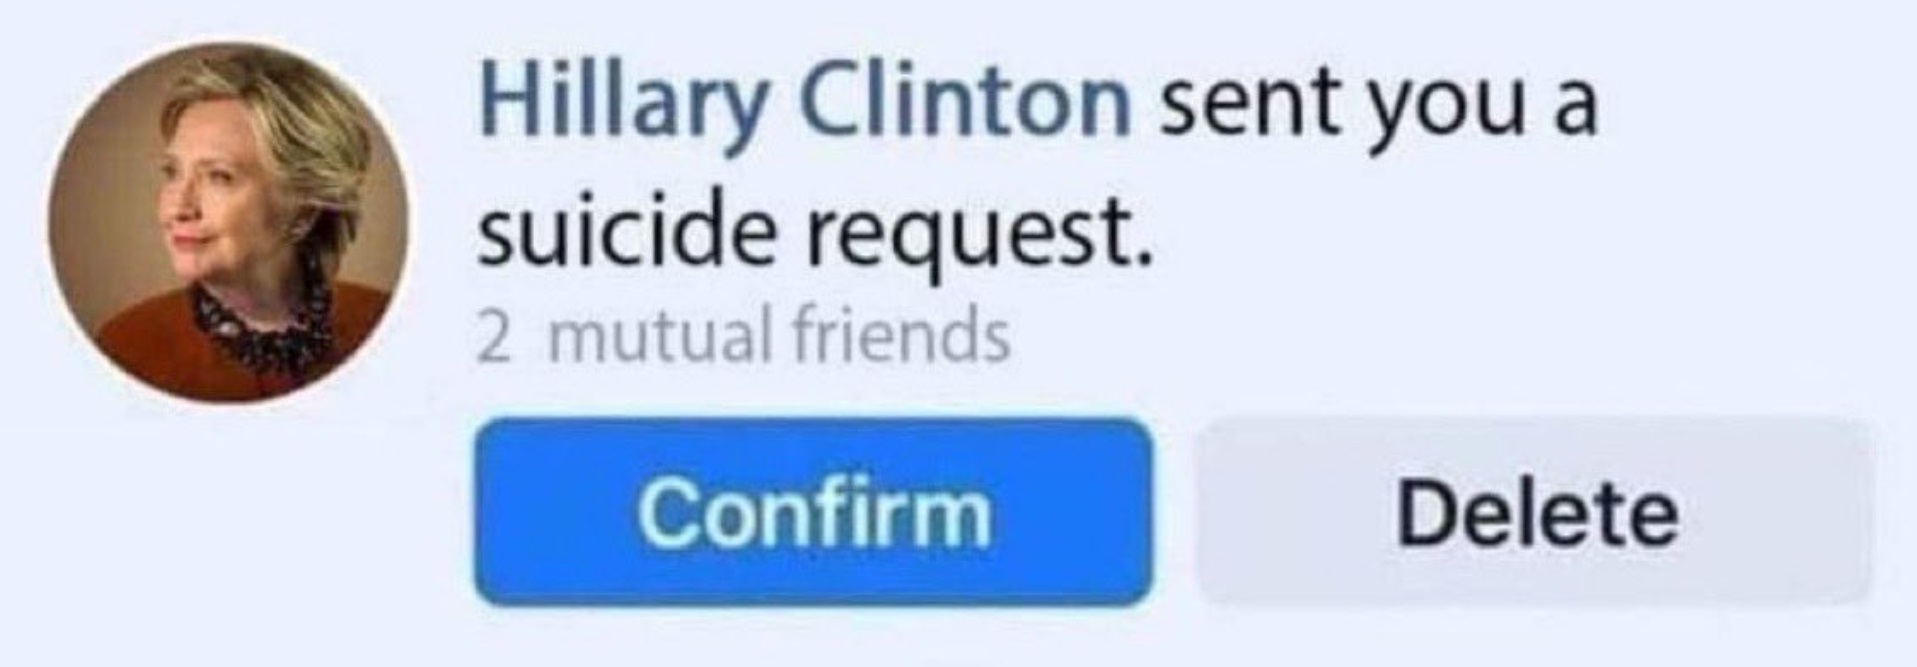 PHOTO Hillary Clinton Sent You A Suicide Request Tulsi Gabbard Notification